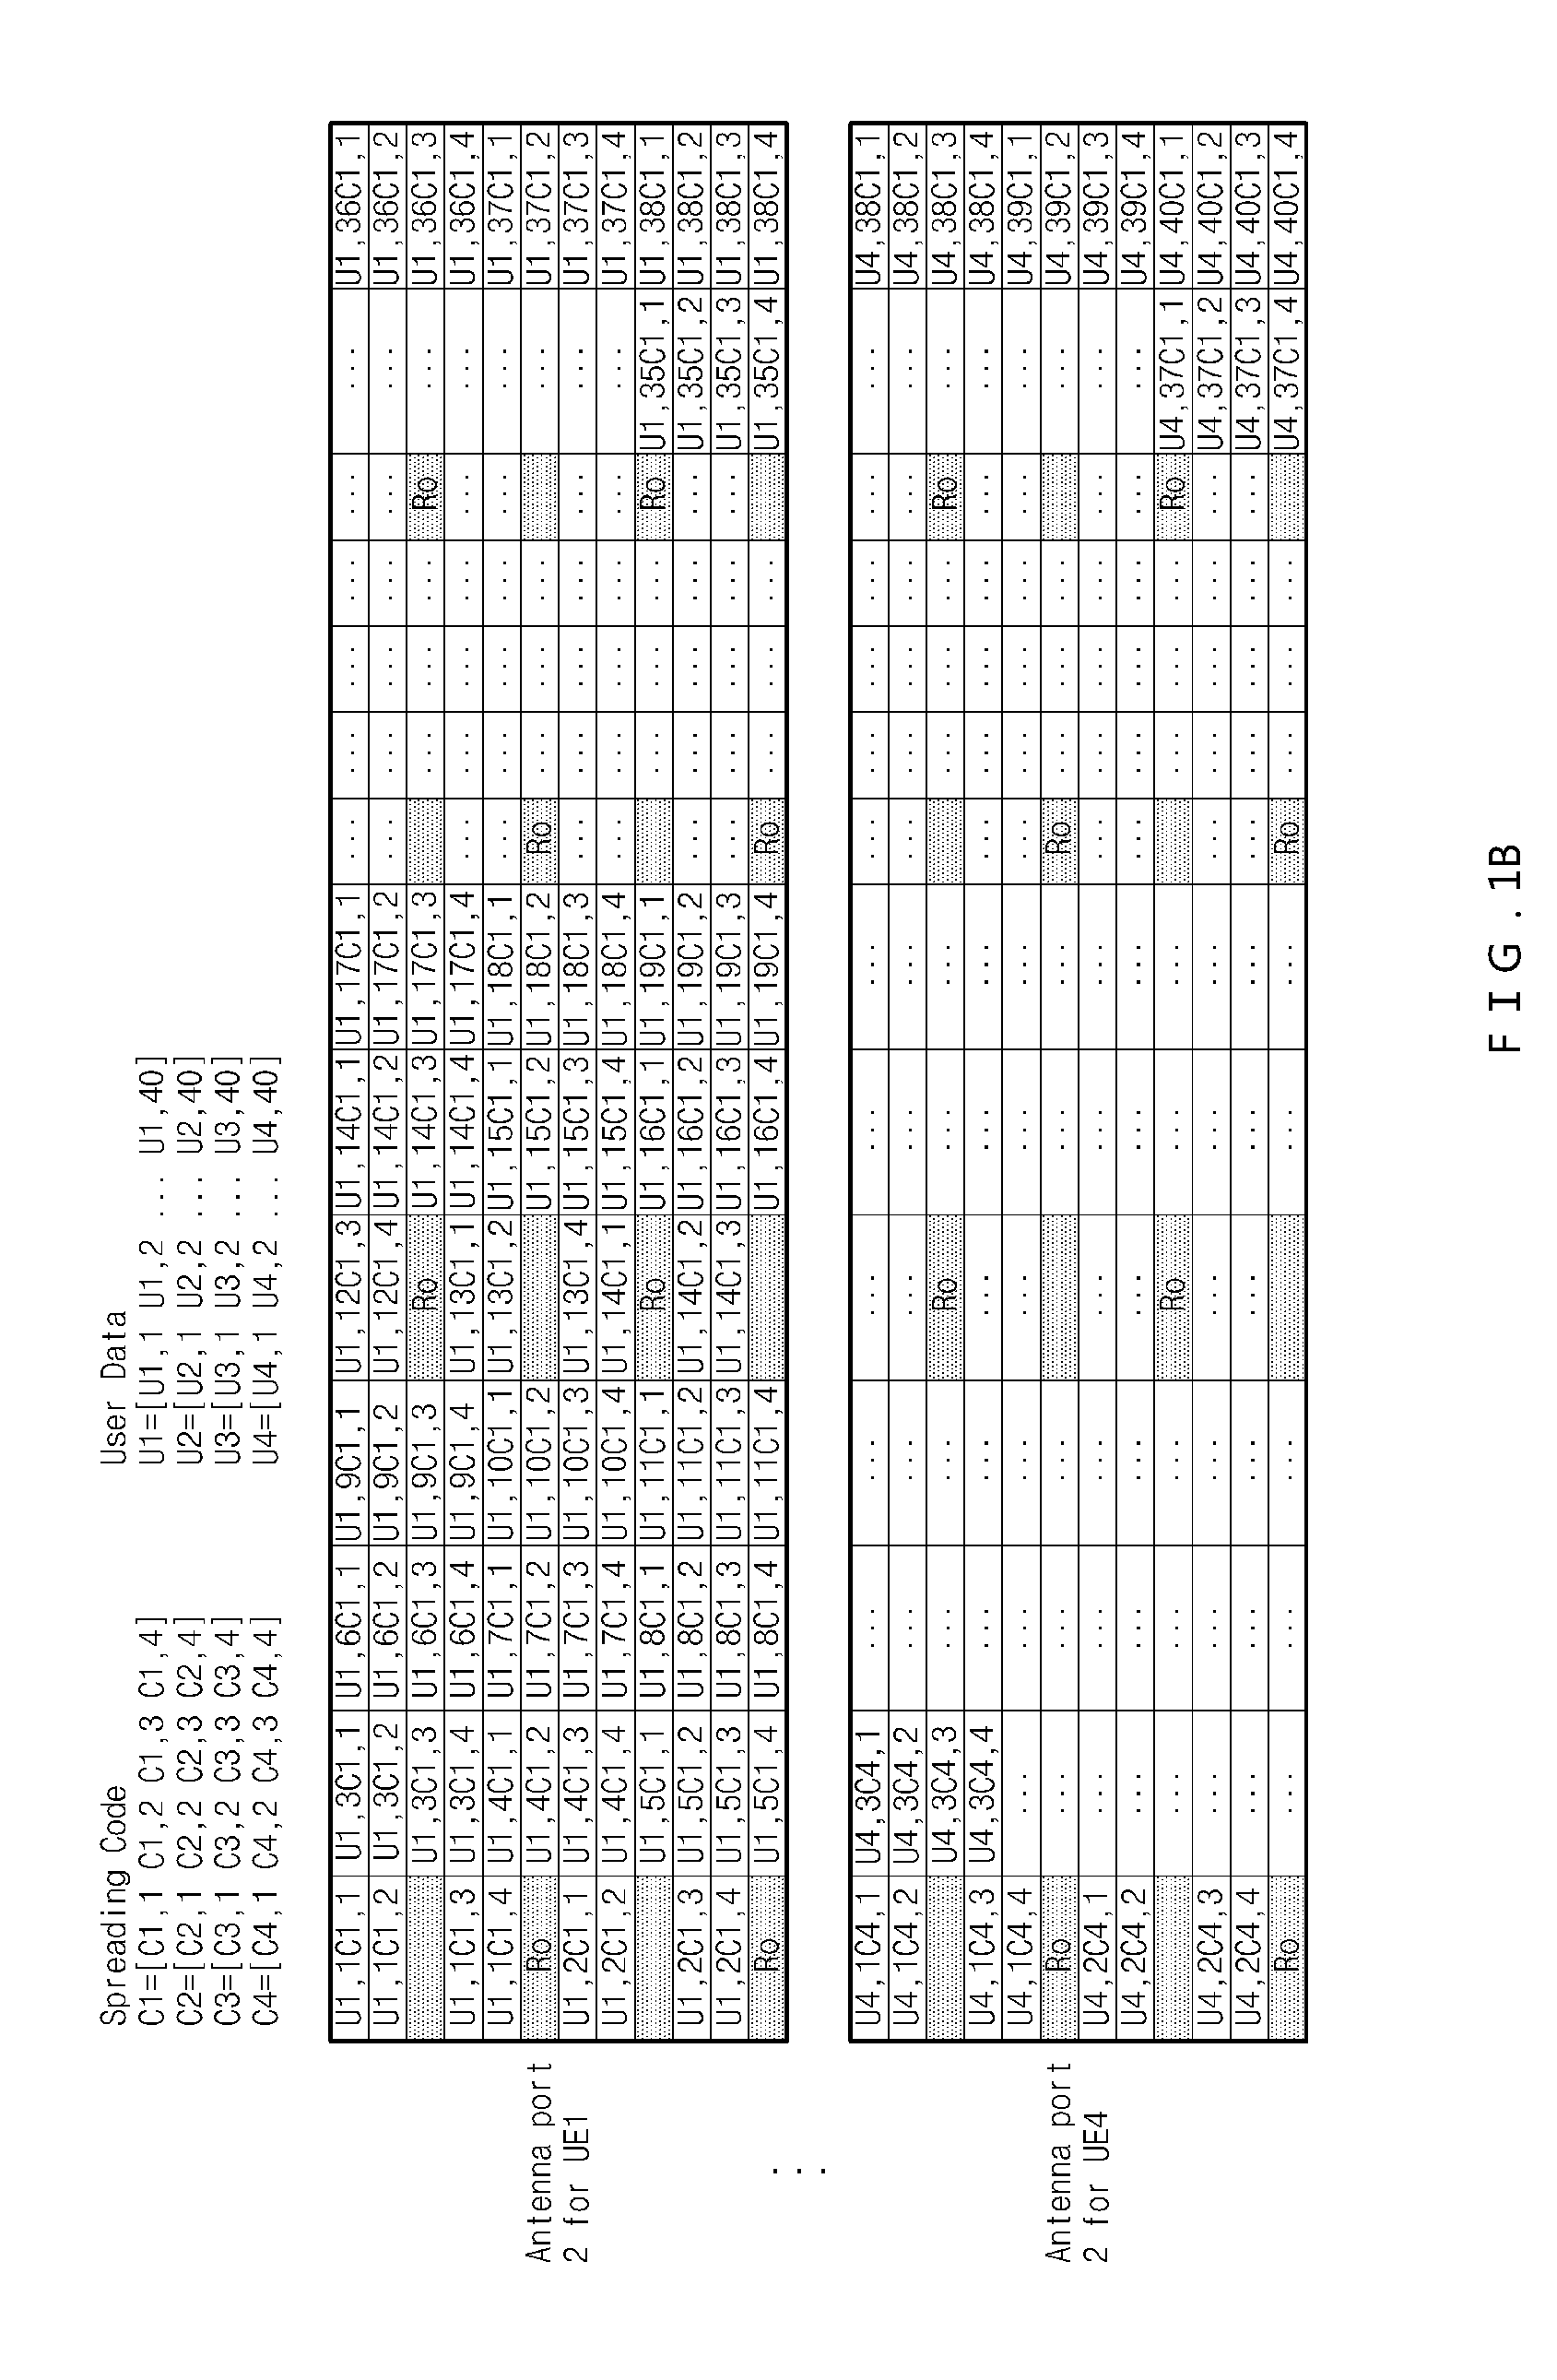 Low-rate data transmission in LTE based satellite ratio interface